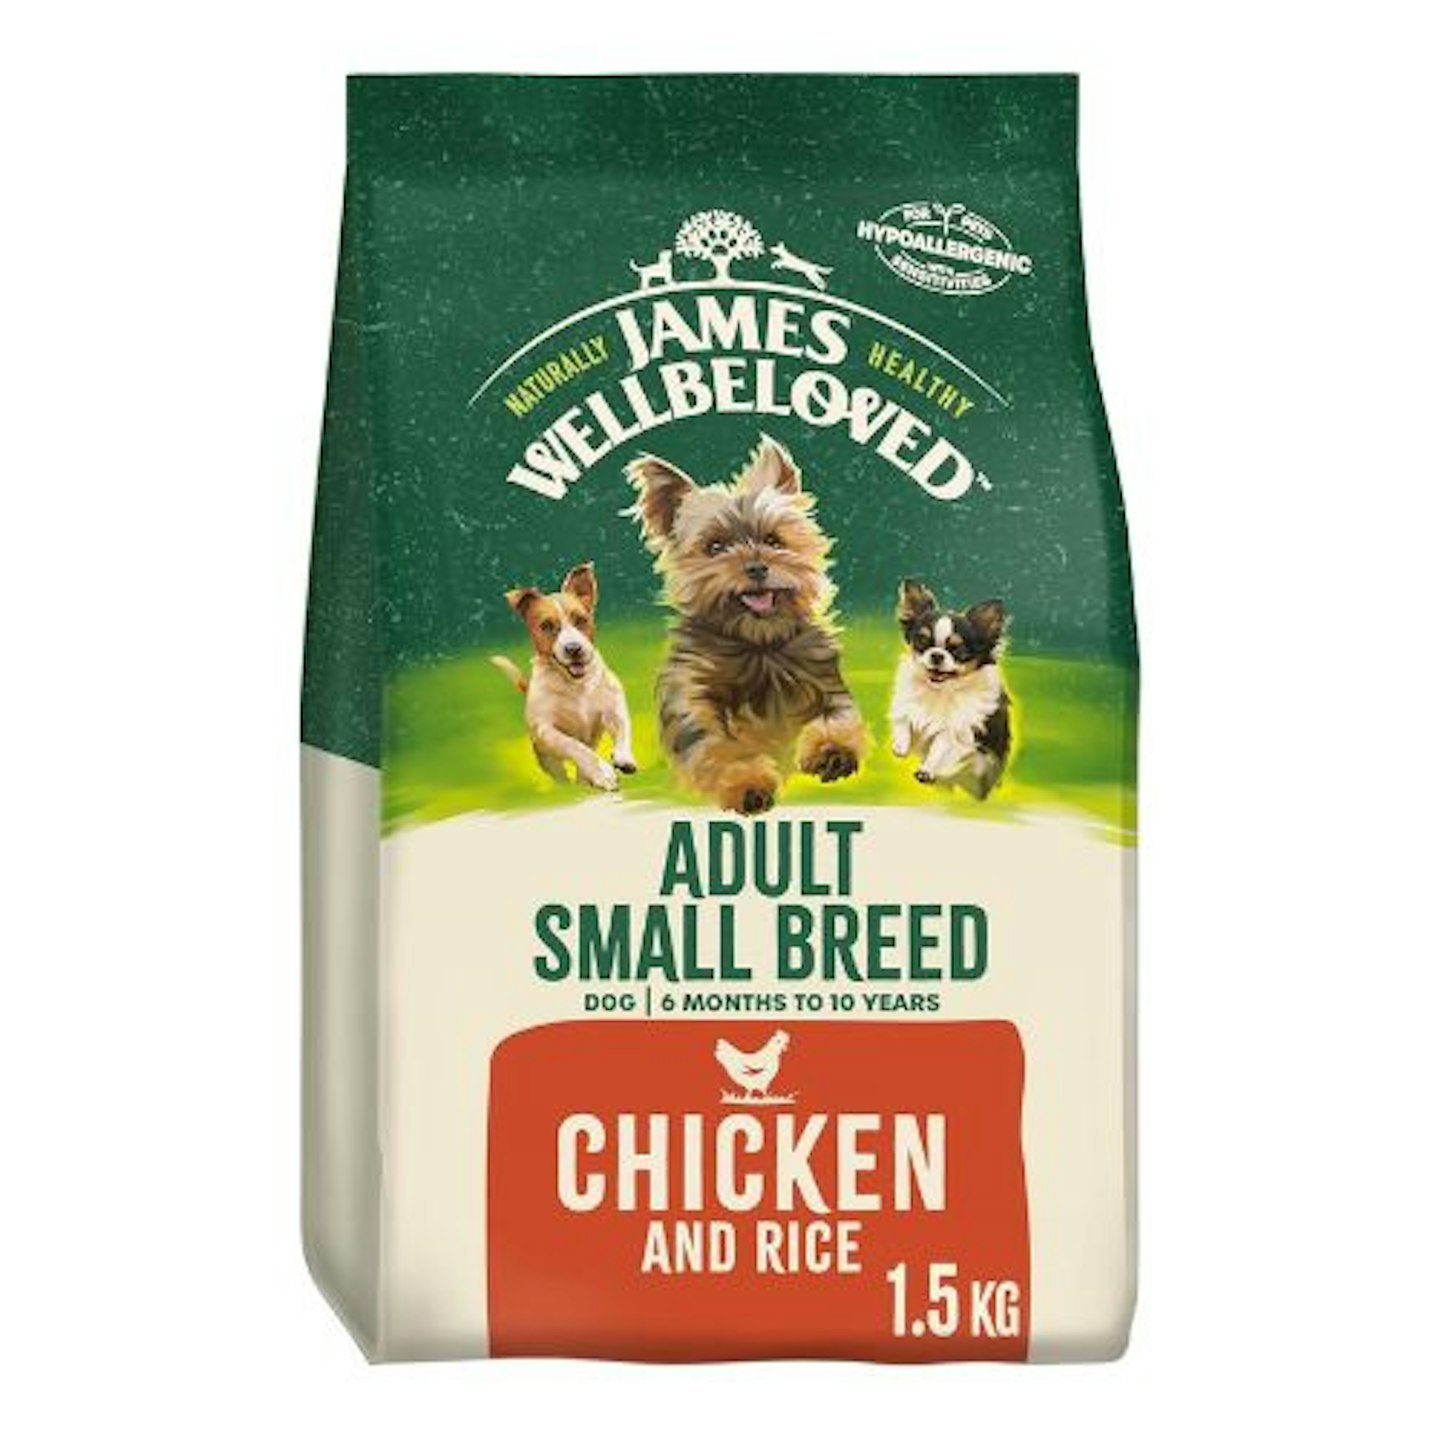 James Wellbeloved Adult Small Breed Chicken and Rice 1.5 kg Bag, Hypoallergenic Dry Dog Food